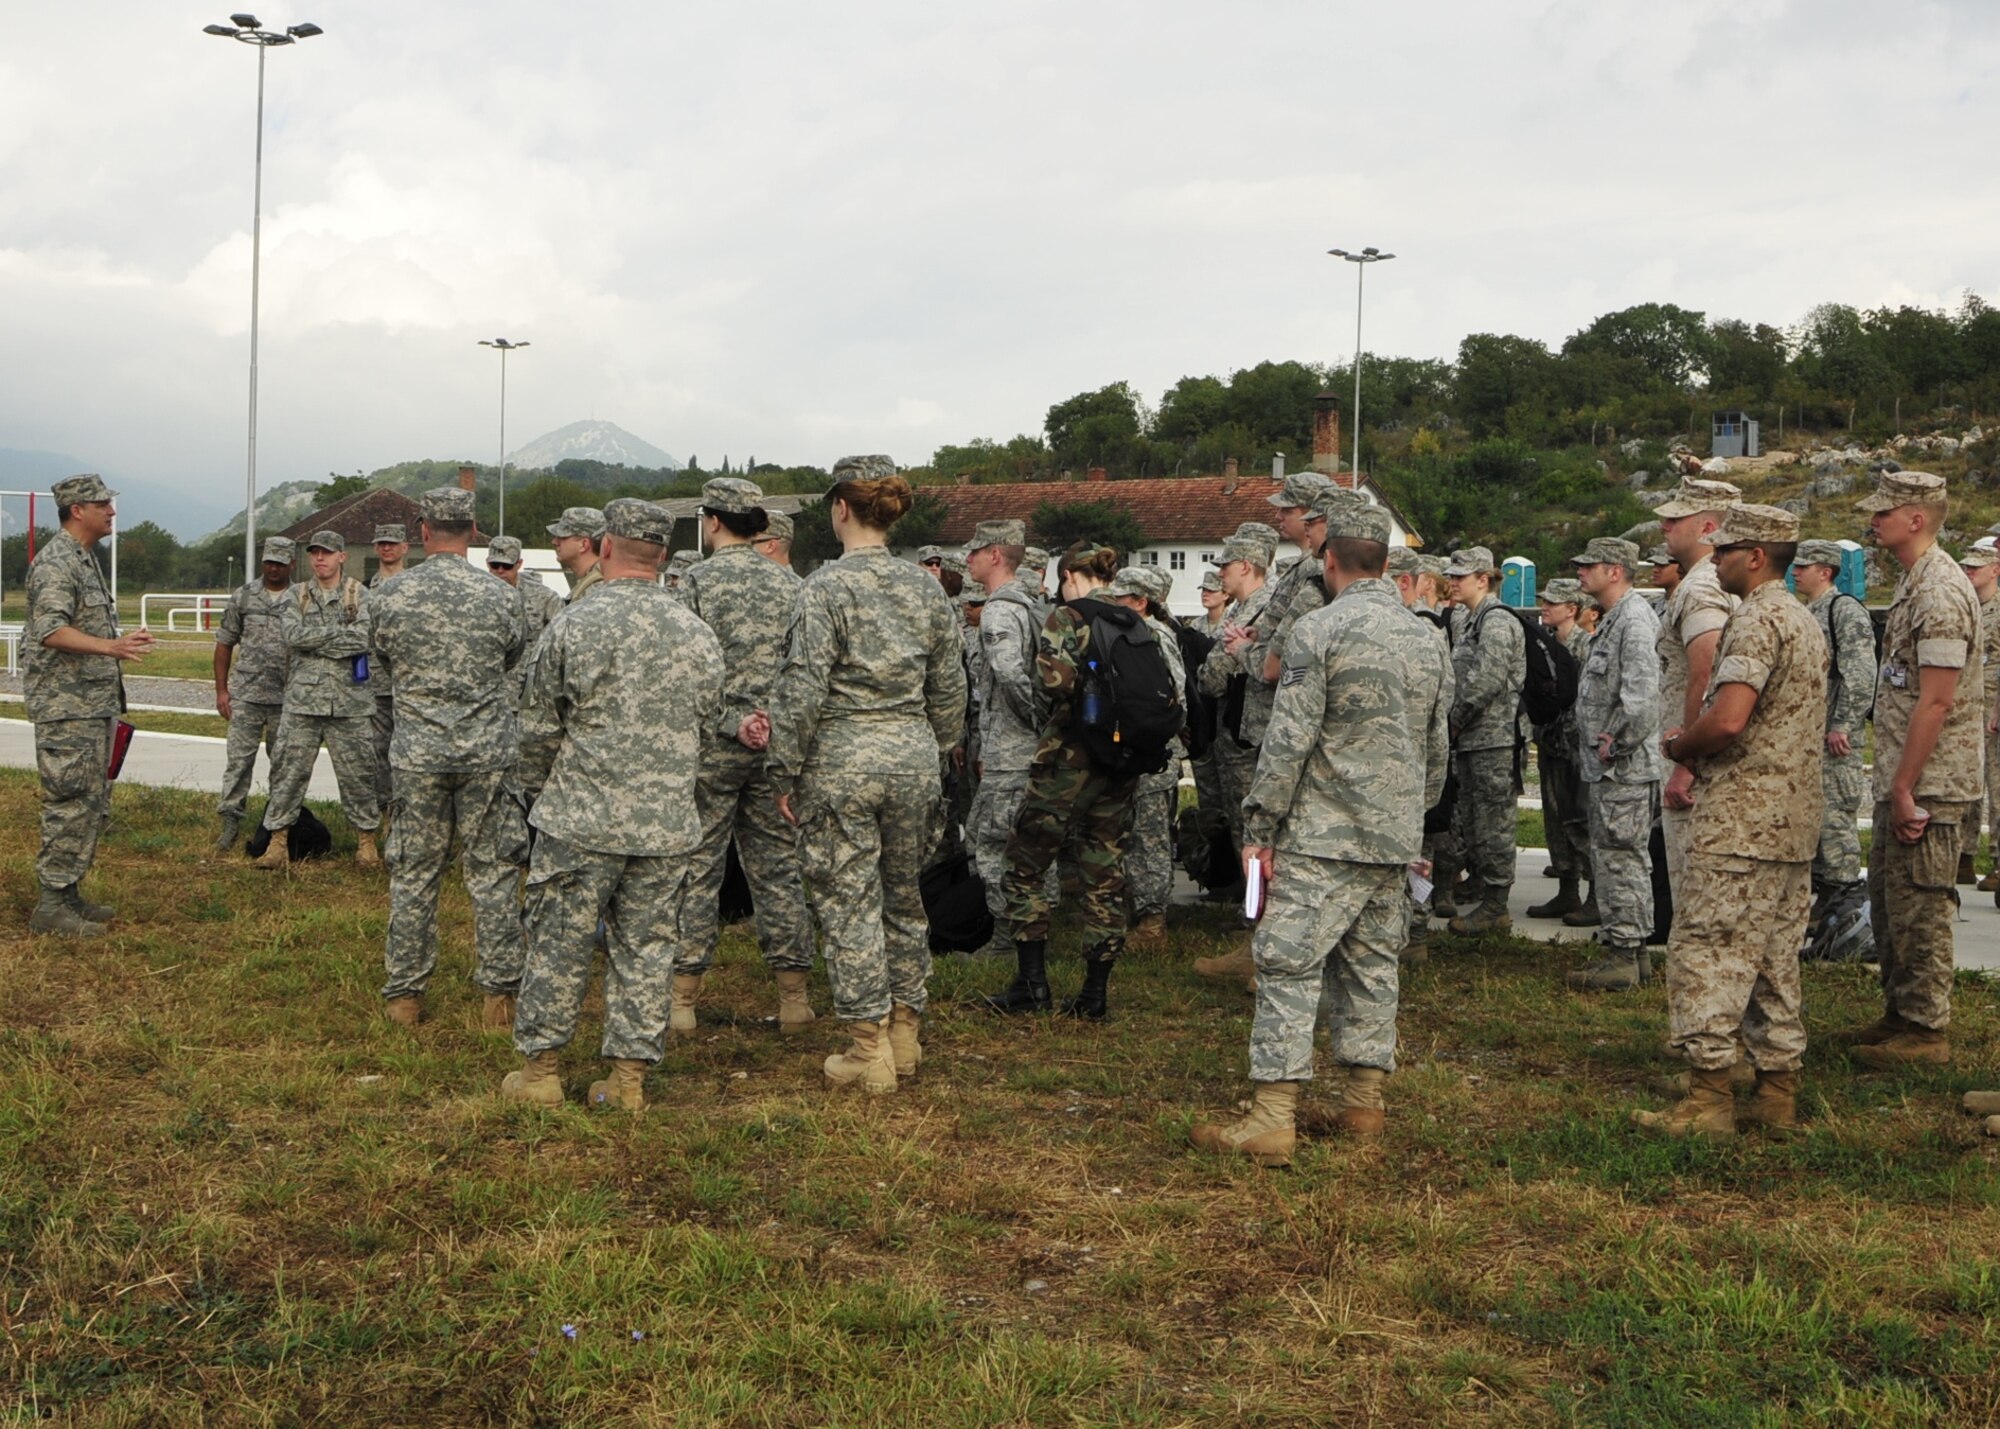 Lt. Col. Brent Vosseller, MEDCEUR 2010 exercise commander, briefs U.S. Air Force, Army, and Marine Corps members on ways to show consideration for other services Sept. 9 on Danilovgrad Army Base, Montenegro. Military members from the U.S. and nine other nations are here to work together during MEDCEUR, a medical training exercise in central and eastern Europe. For more information, visit www.usafe.af.mil/medceur.asp and www.odbrana.gov.me. (U.S. Air Force photo/Airman 1st Class Tiffany Deuel)